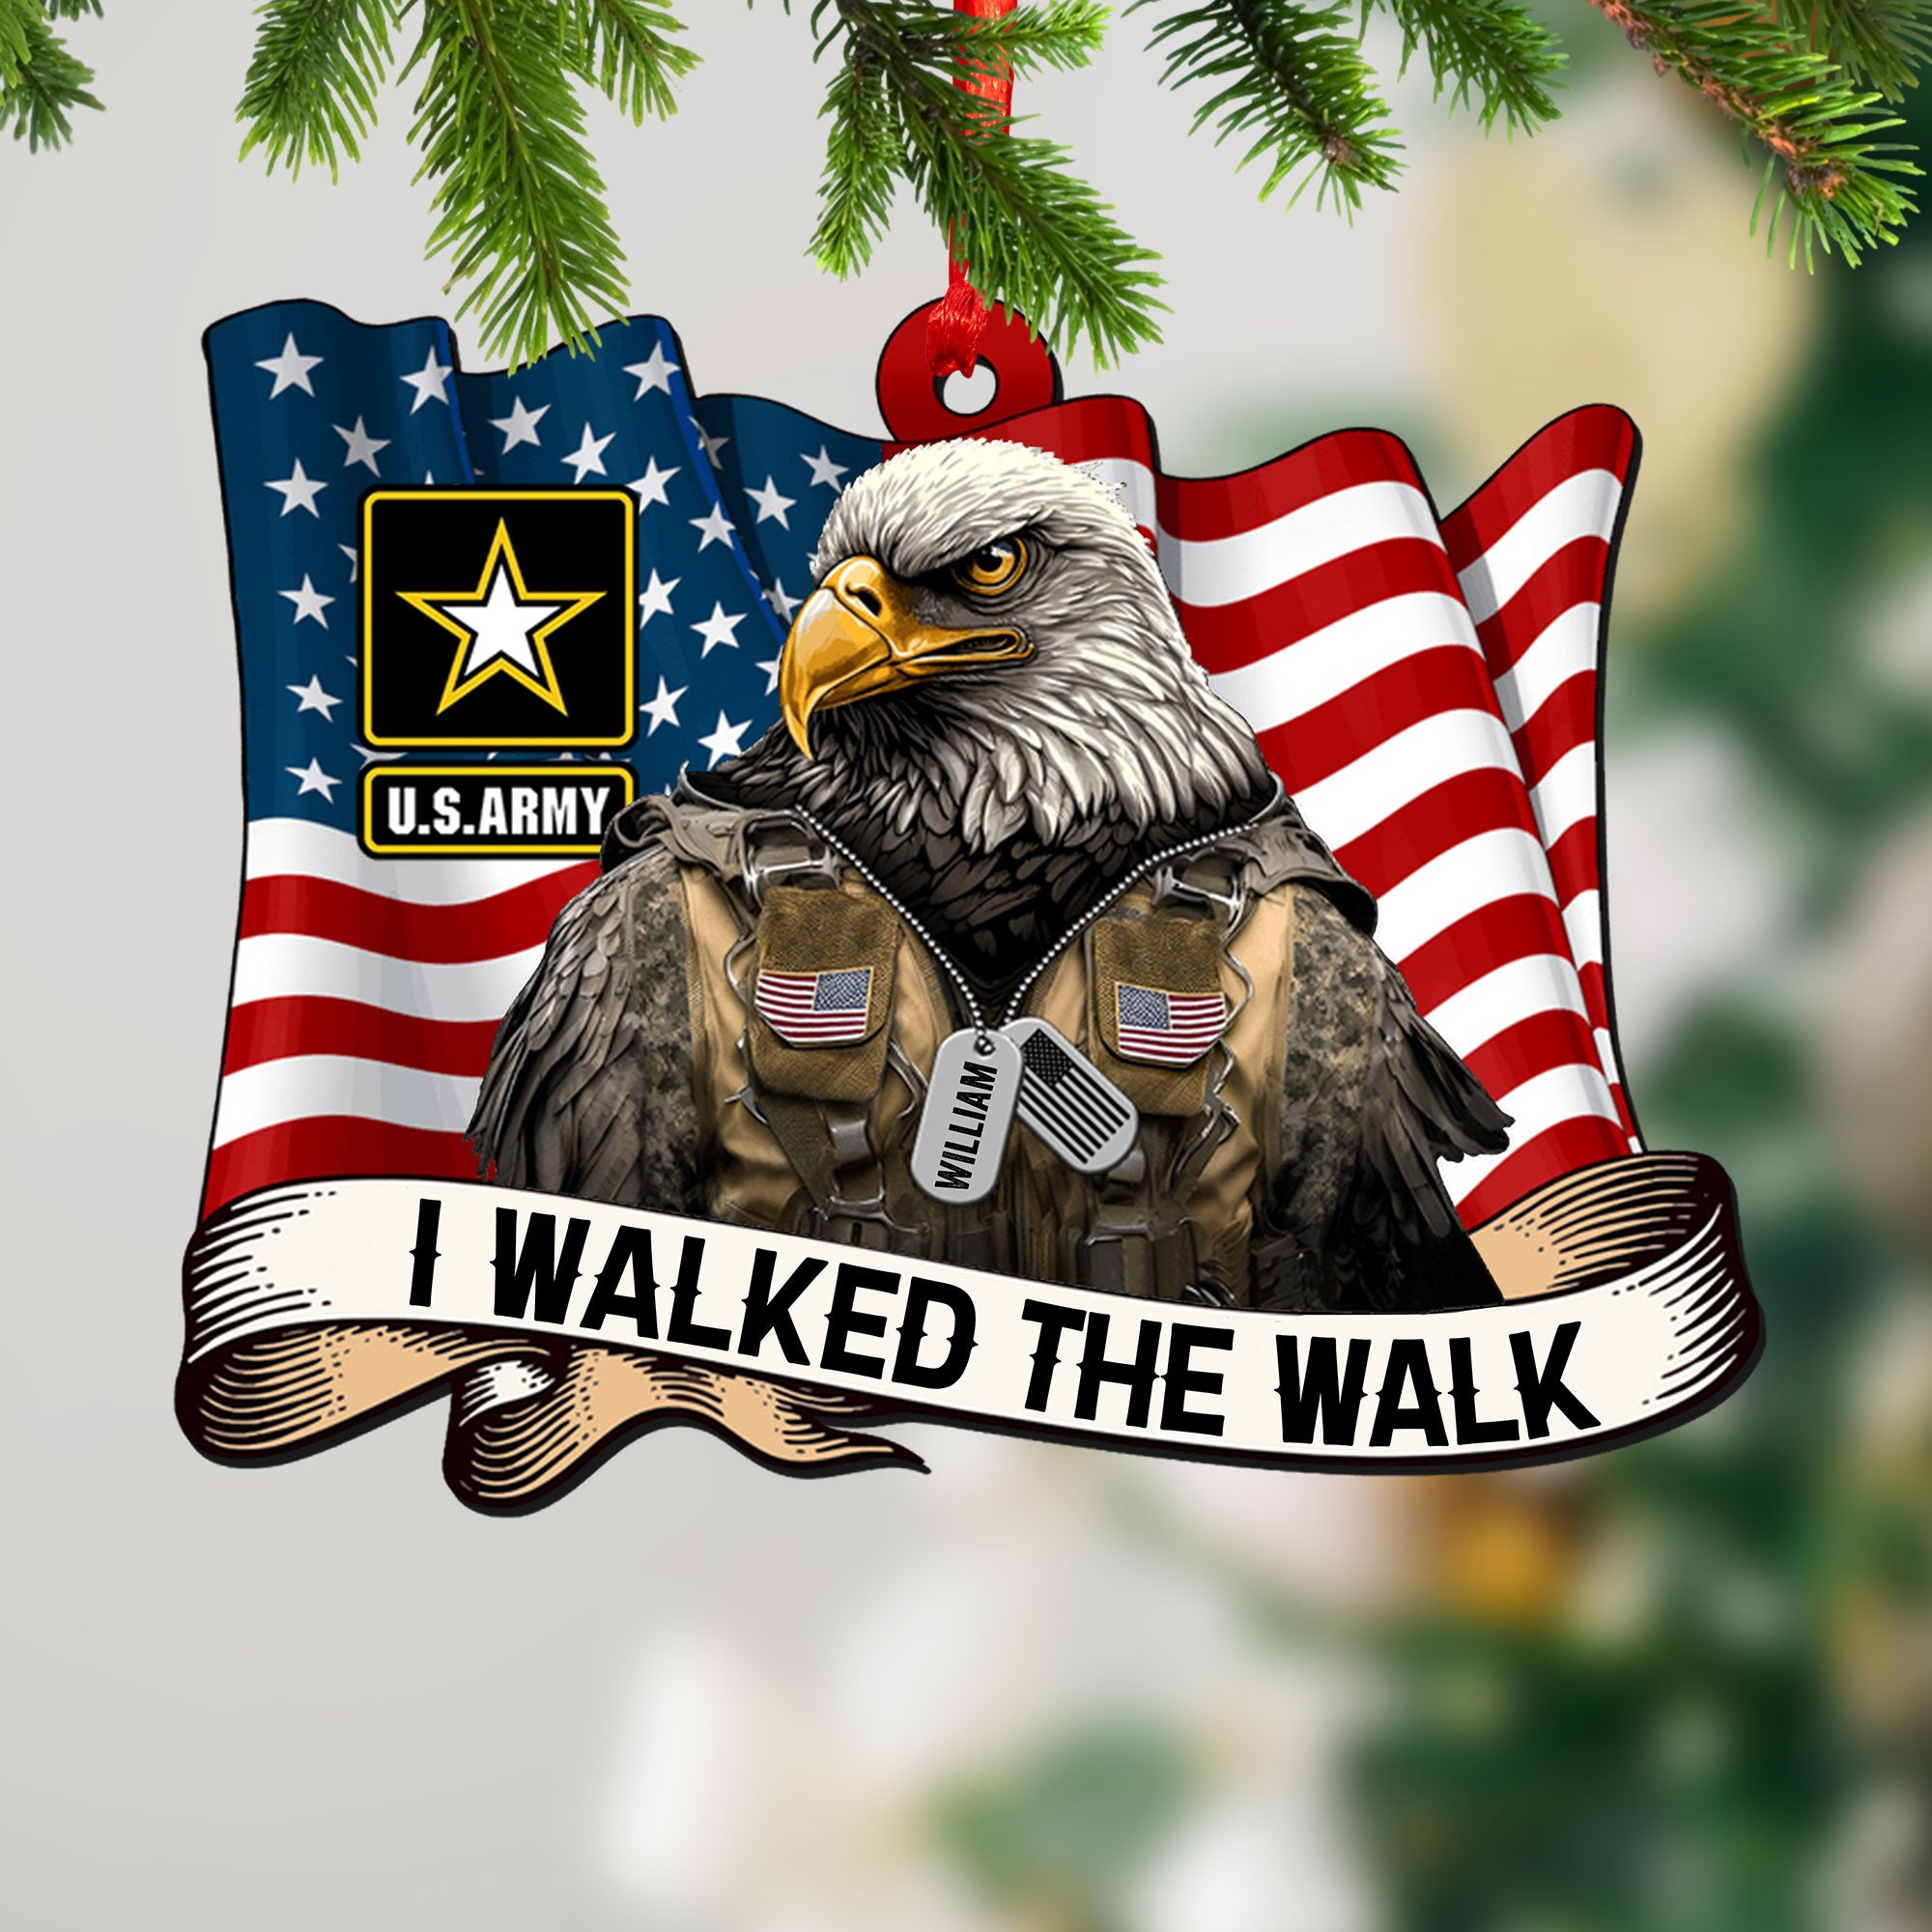 U.S Army, I Walked The Walk - Personalized Acrylic Ornament - Veterans Gift